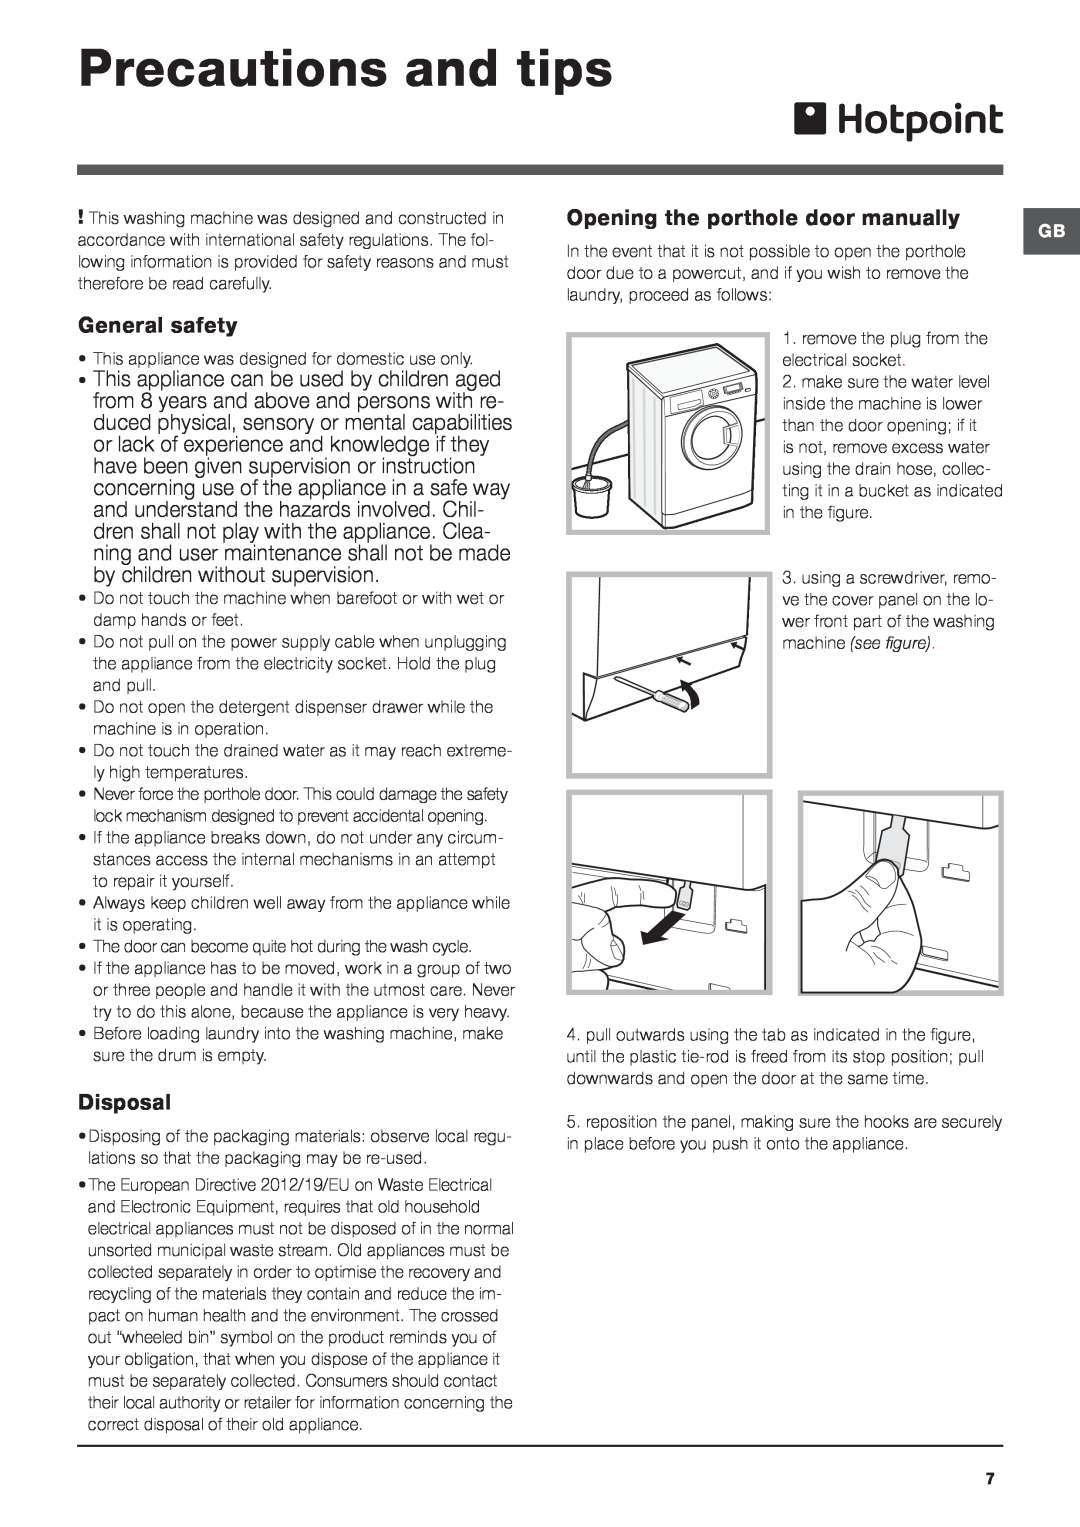 Hotpoint ULTIMA Precautions and tips, Opening the porthole door manually 